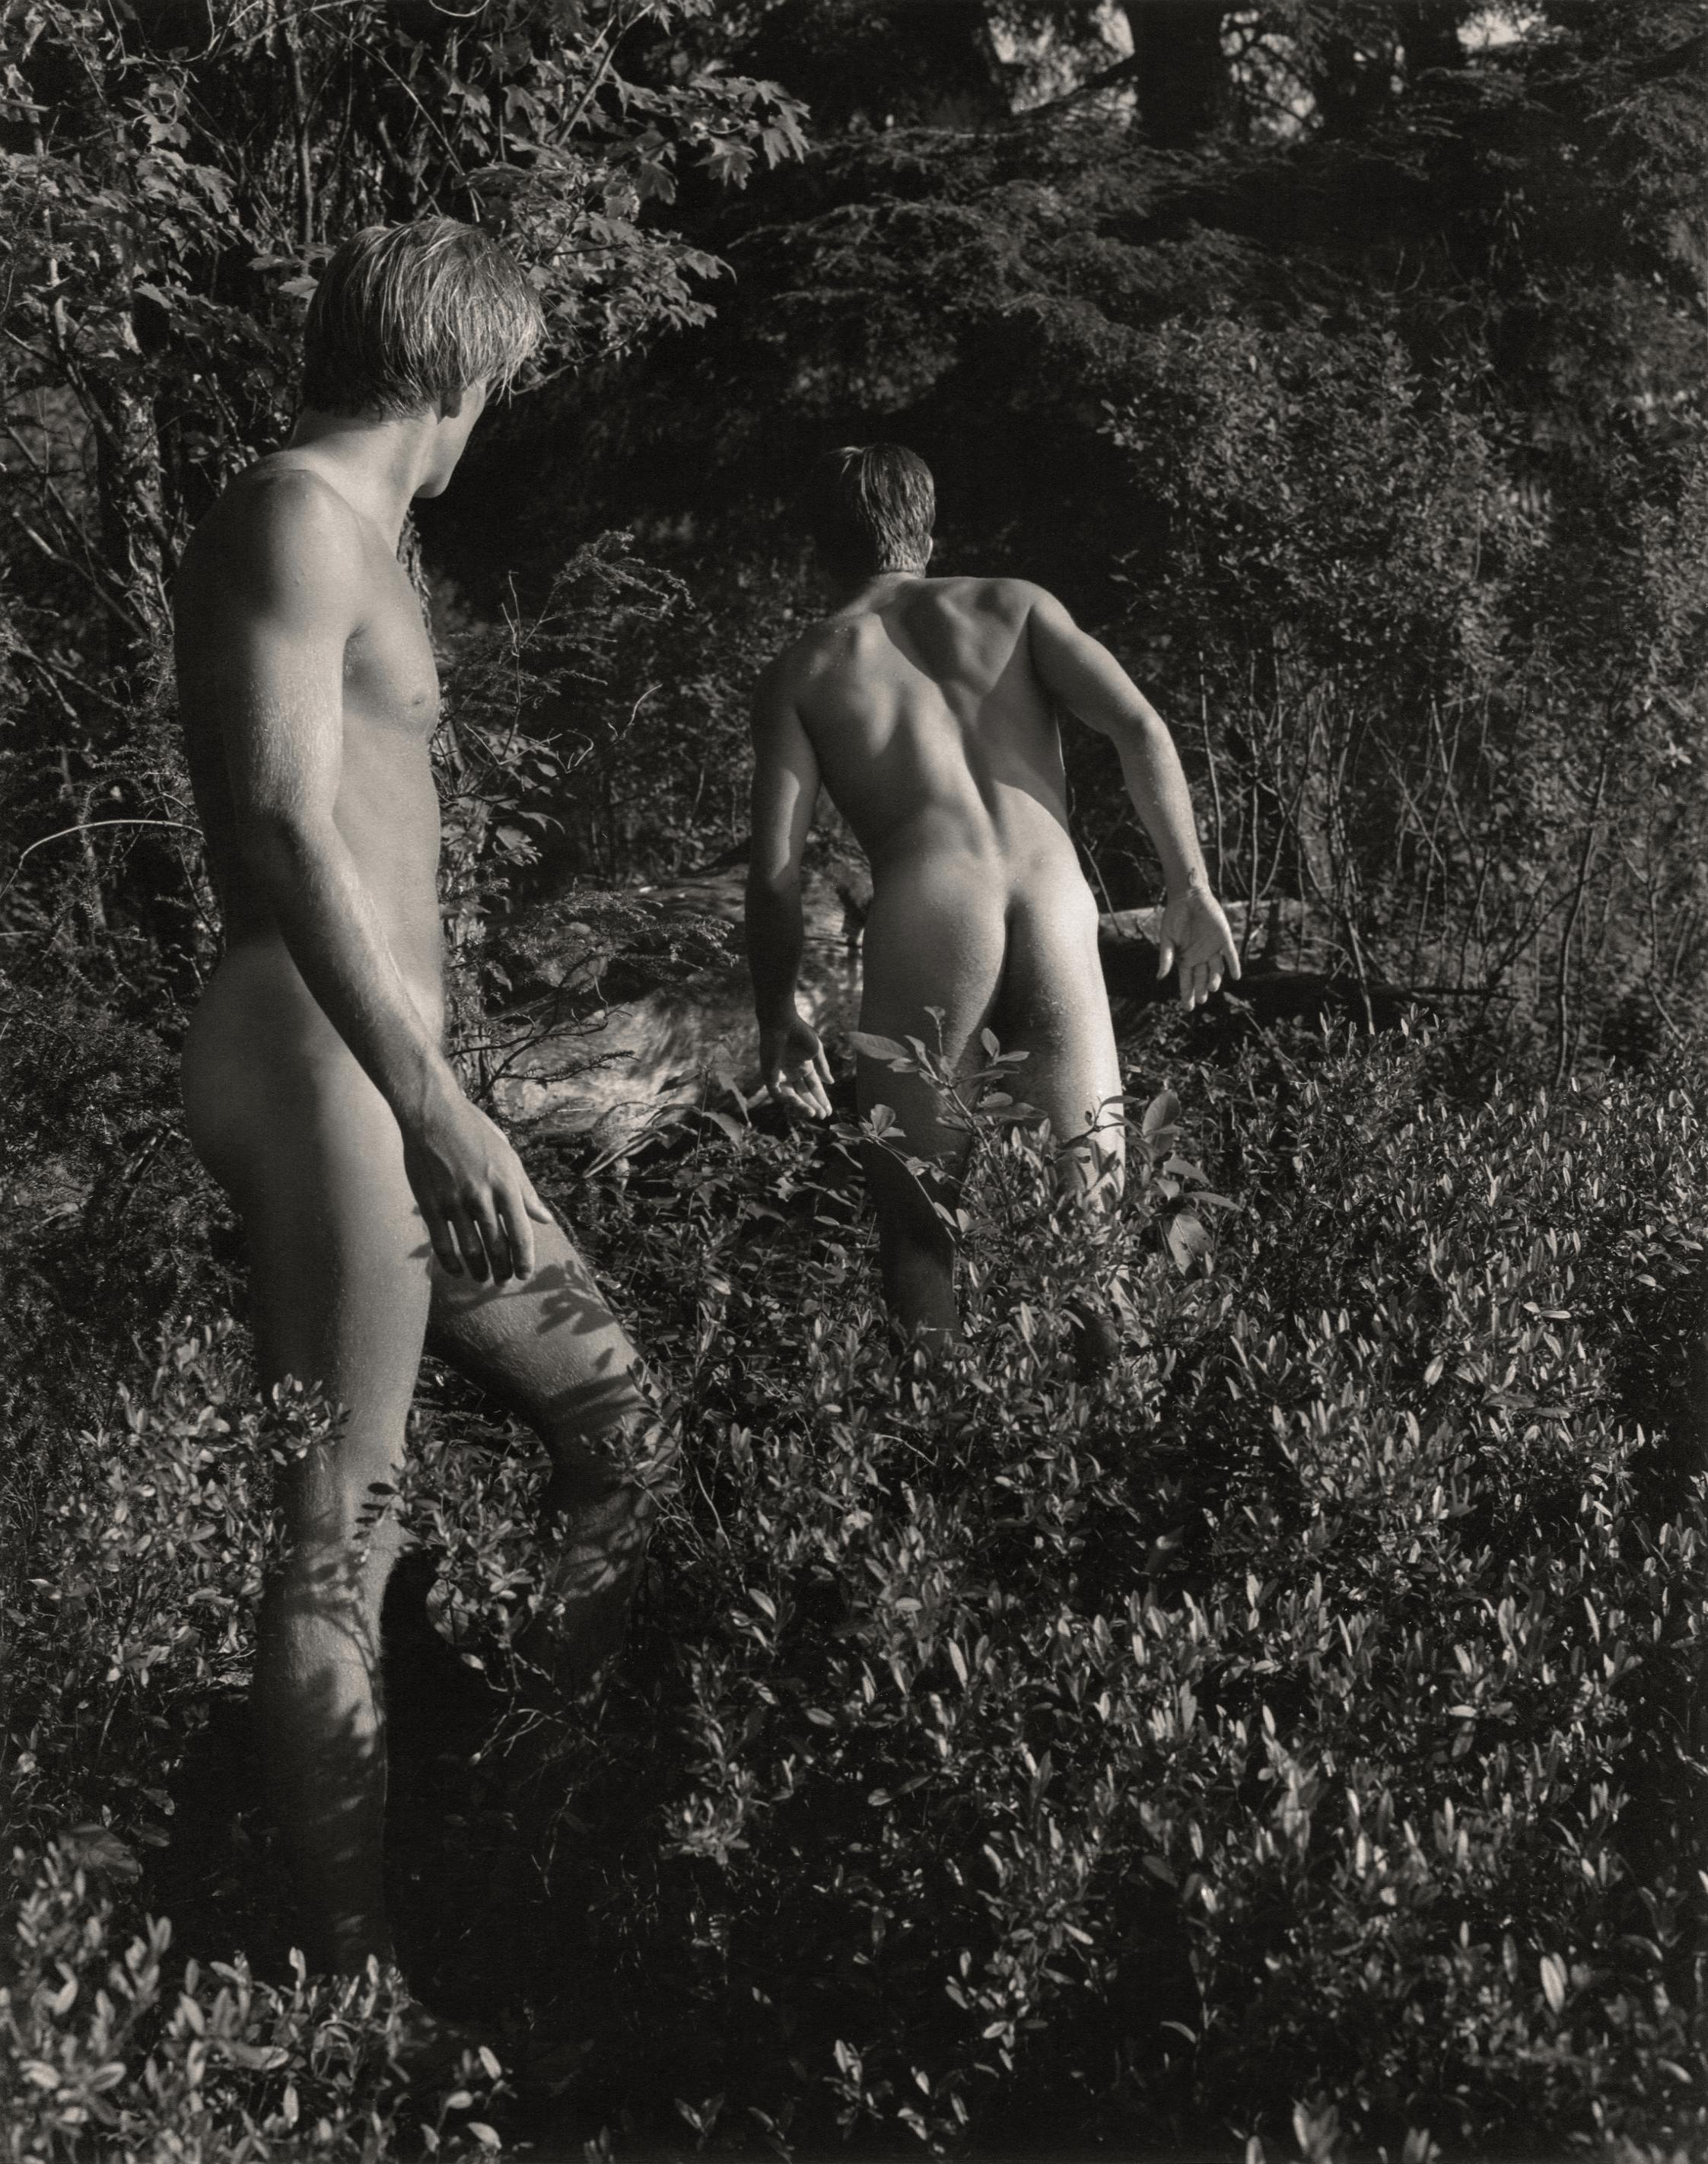 Tyke and Tom, On the Way to Long Pond, Adirondack Park - Photograph by Bruce Weber